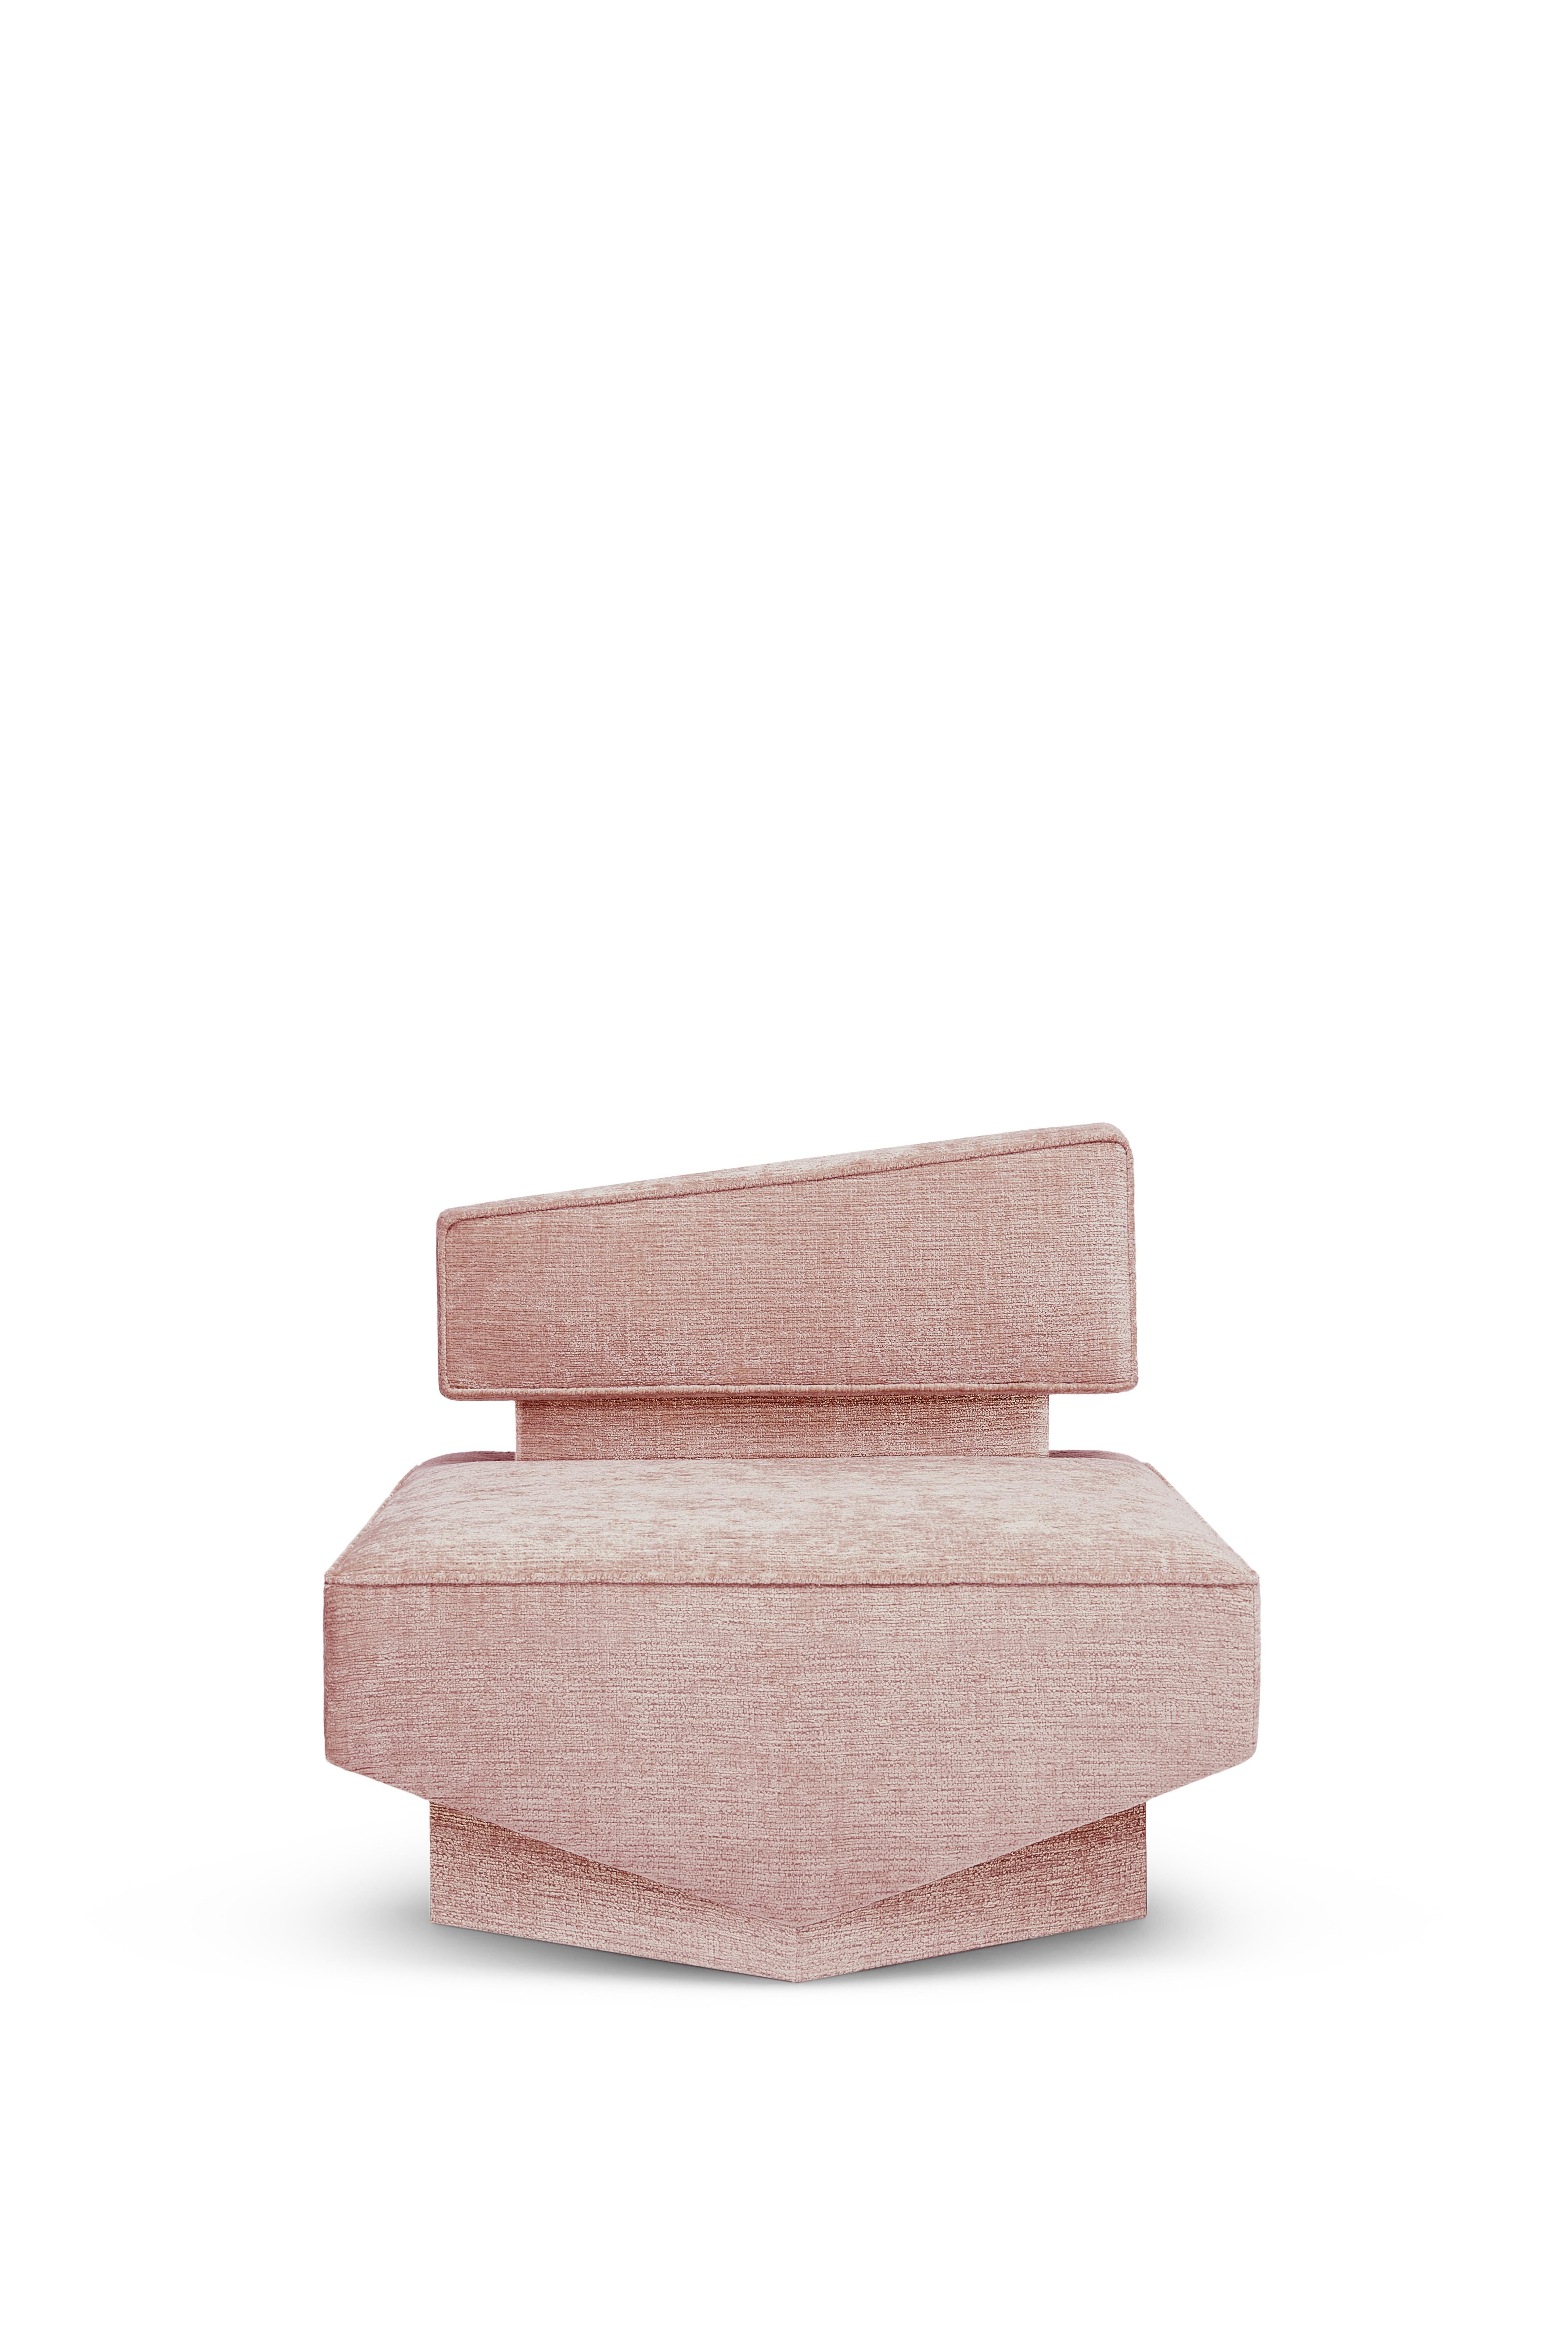 Contemporary Armchair 'Divergent' by Marta Delgado, Walnut, Pink In New Condition For Sale In Paris, FR